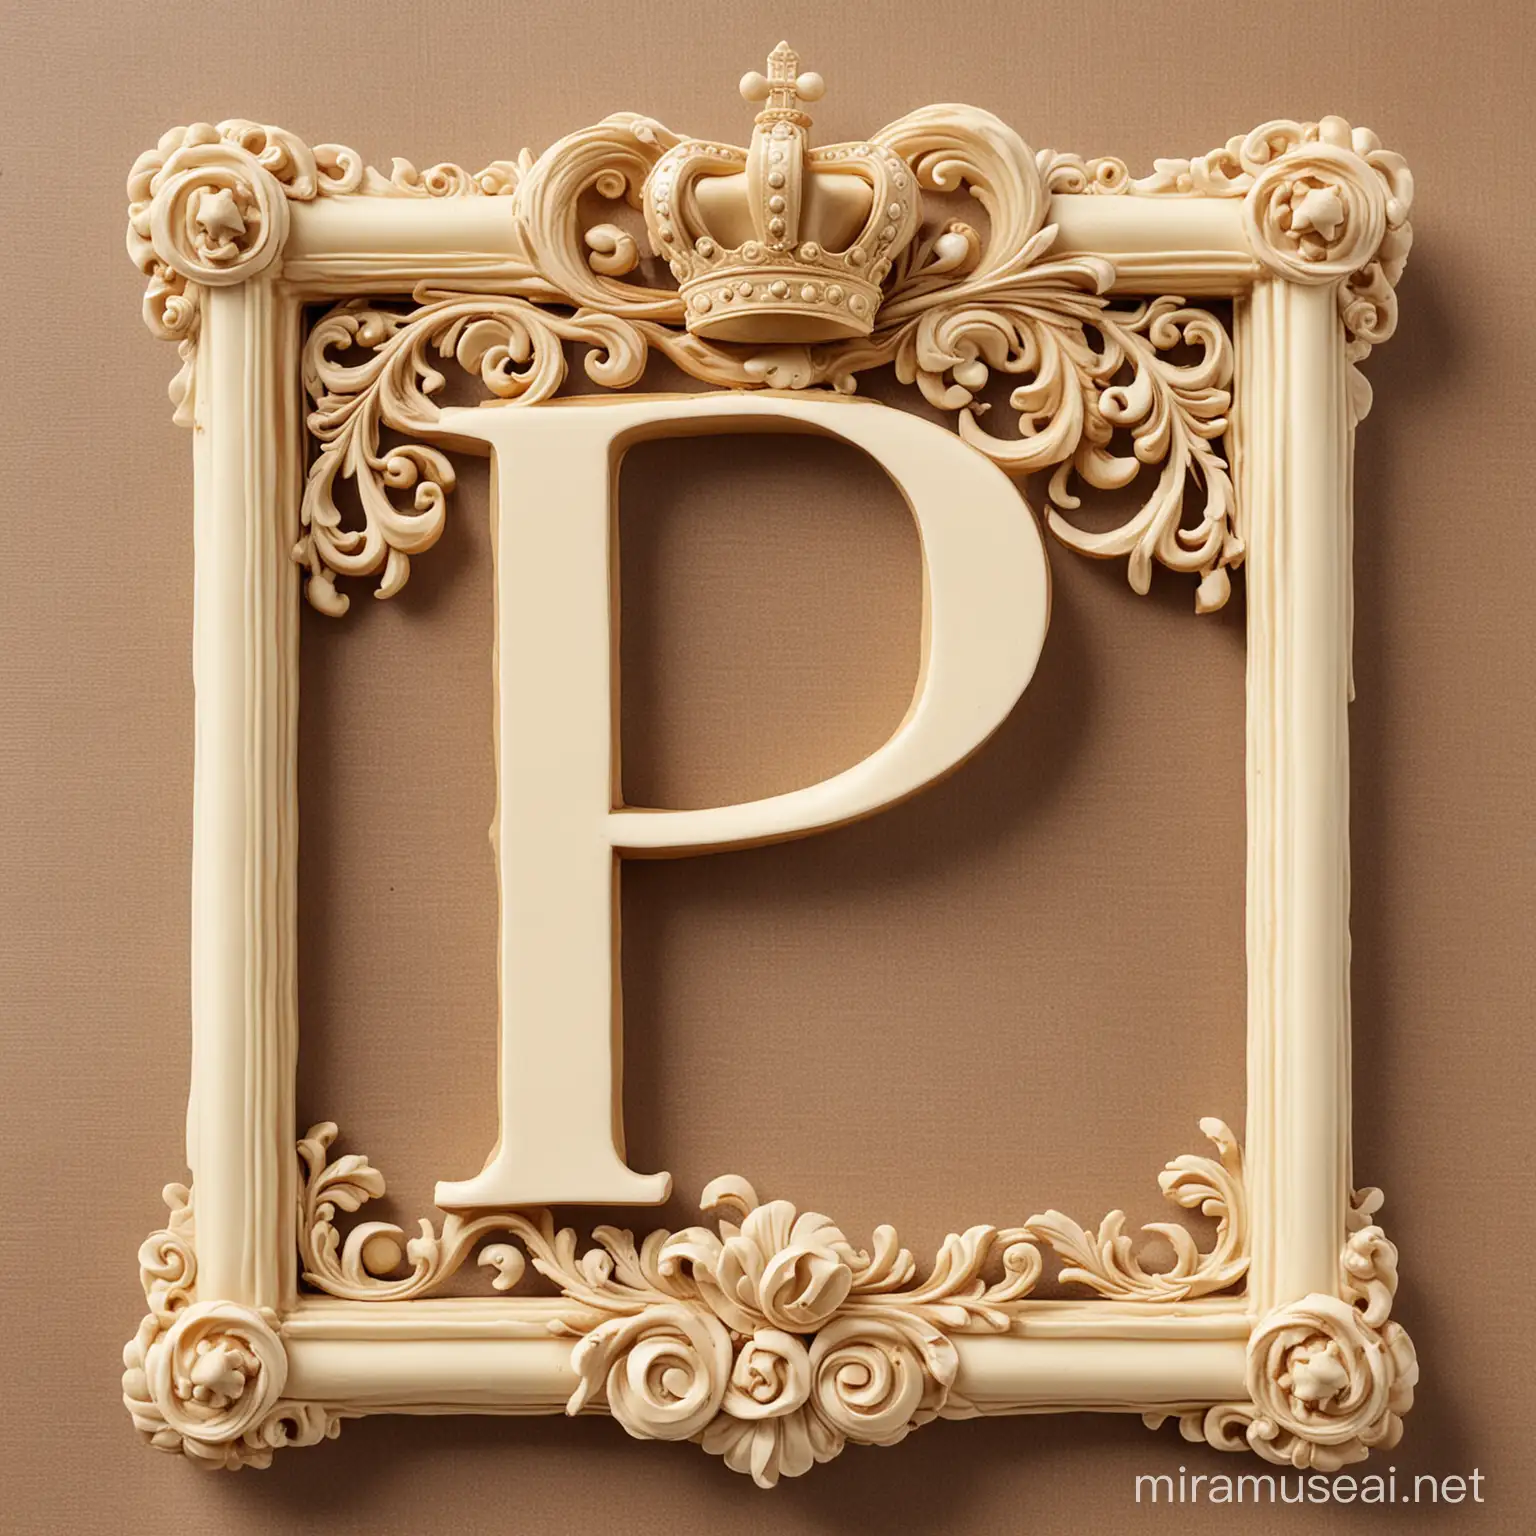 Elegant Pastry Shop with Crown Frame